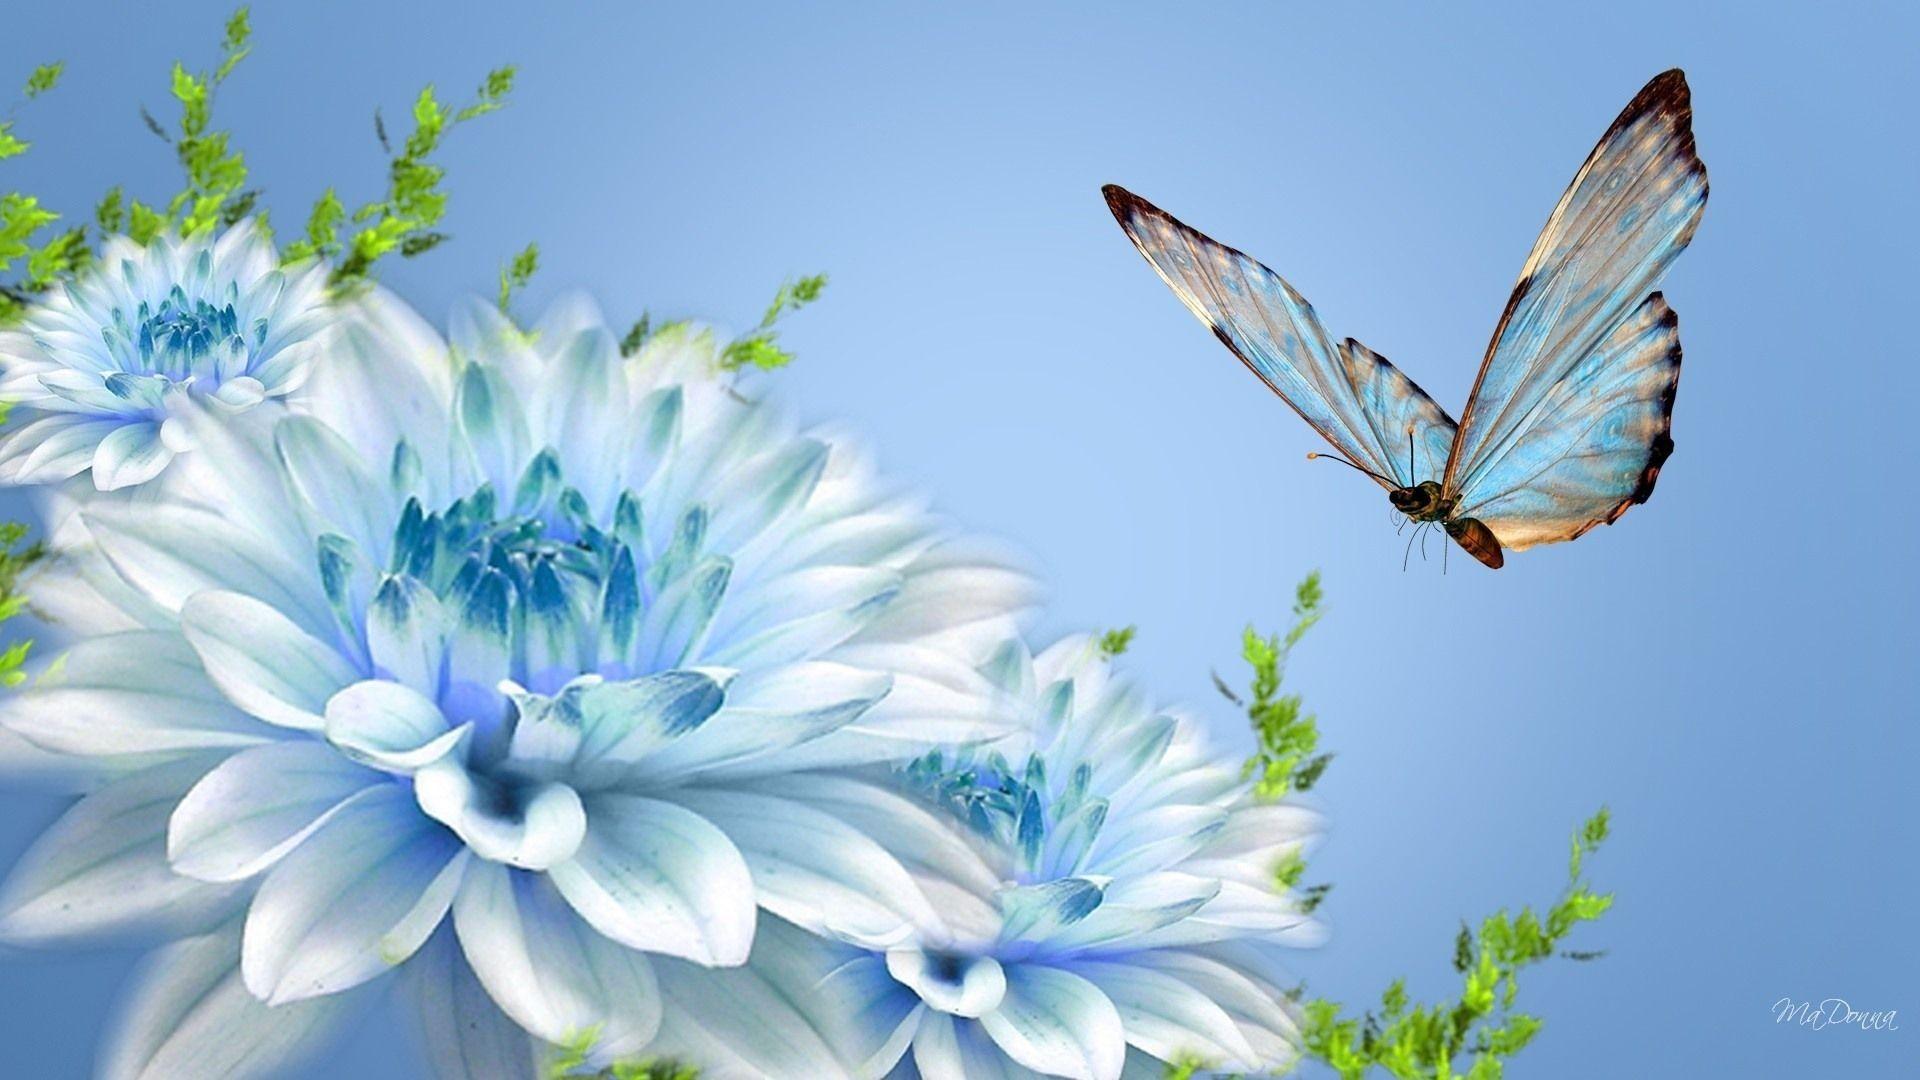 Wallpaper For > Cute Flower And Butterfly Background